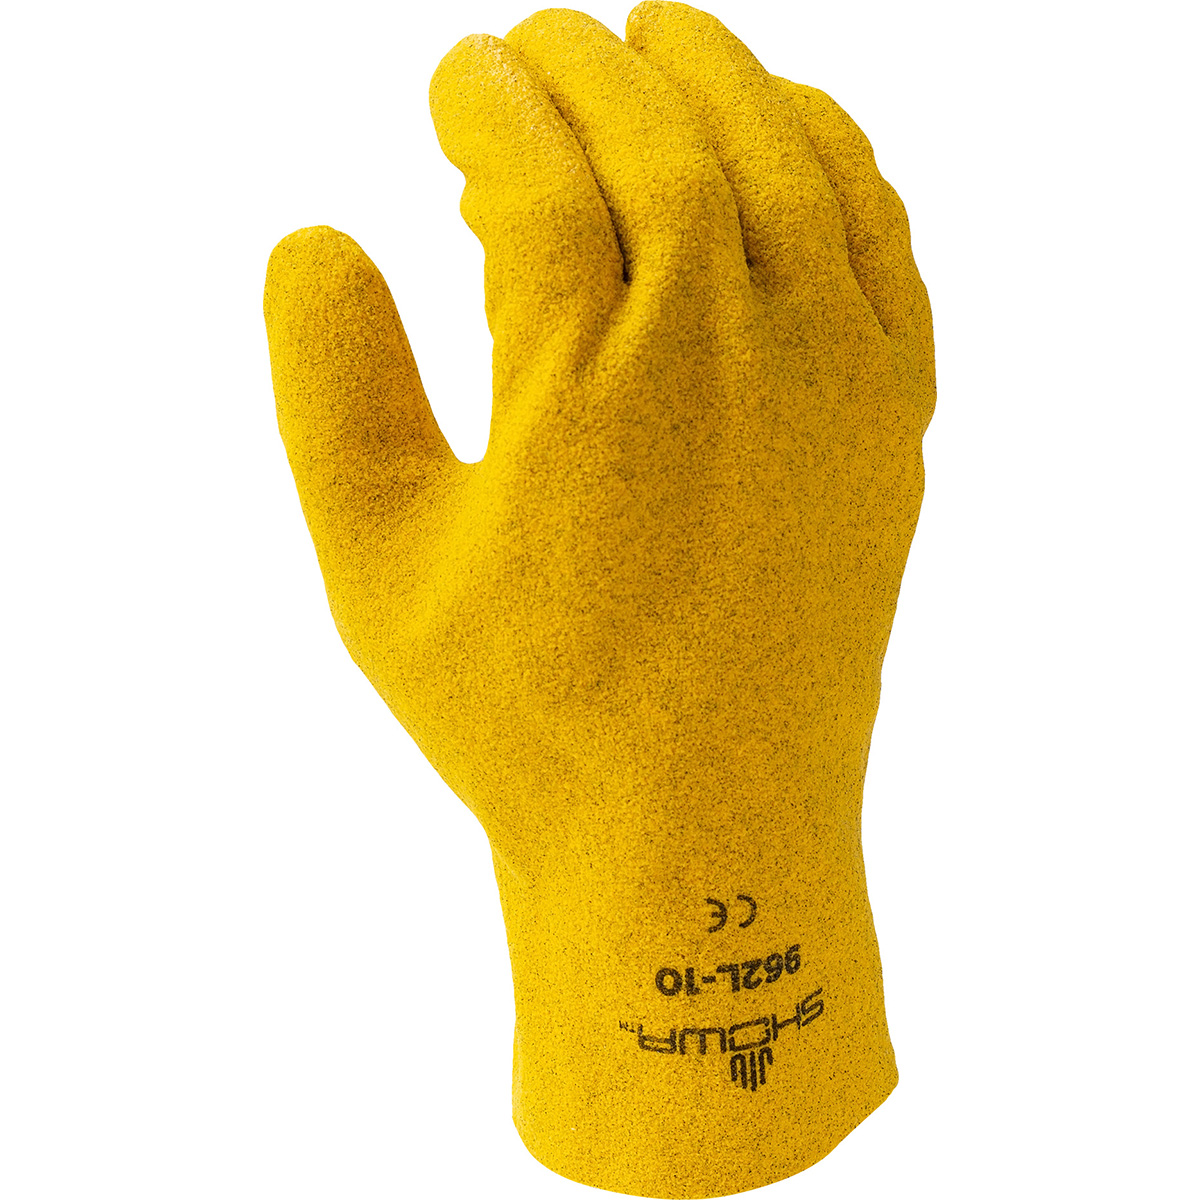 General purpose PVC fully coated, yellow, jersey liner, slip-on, large